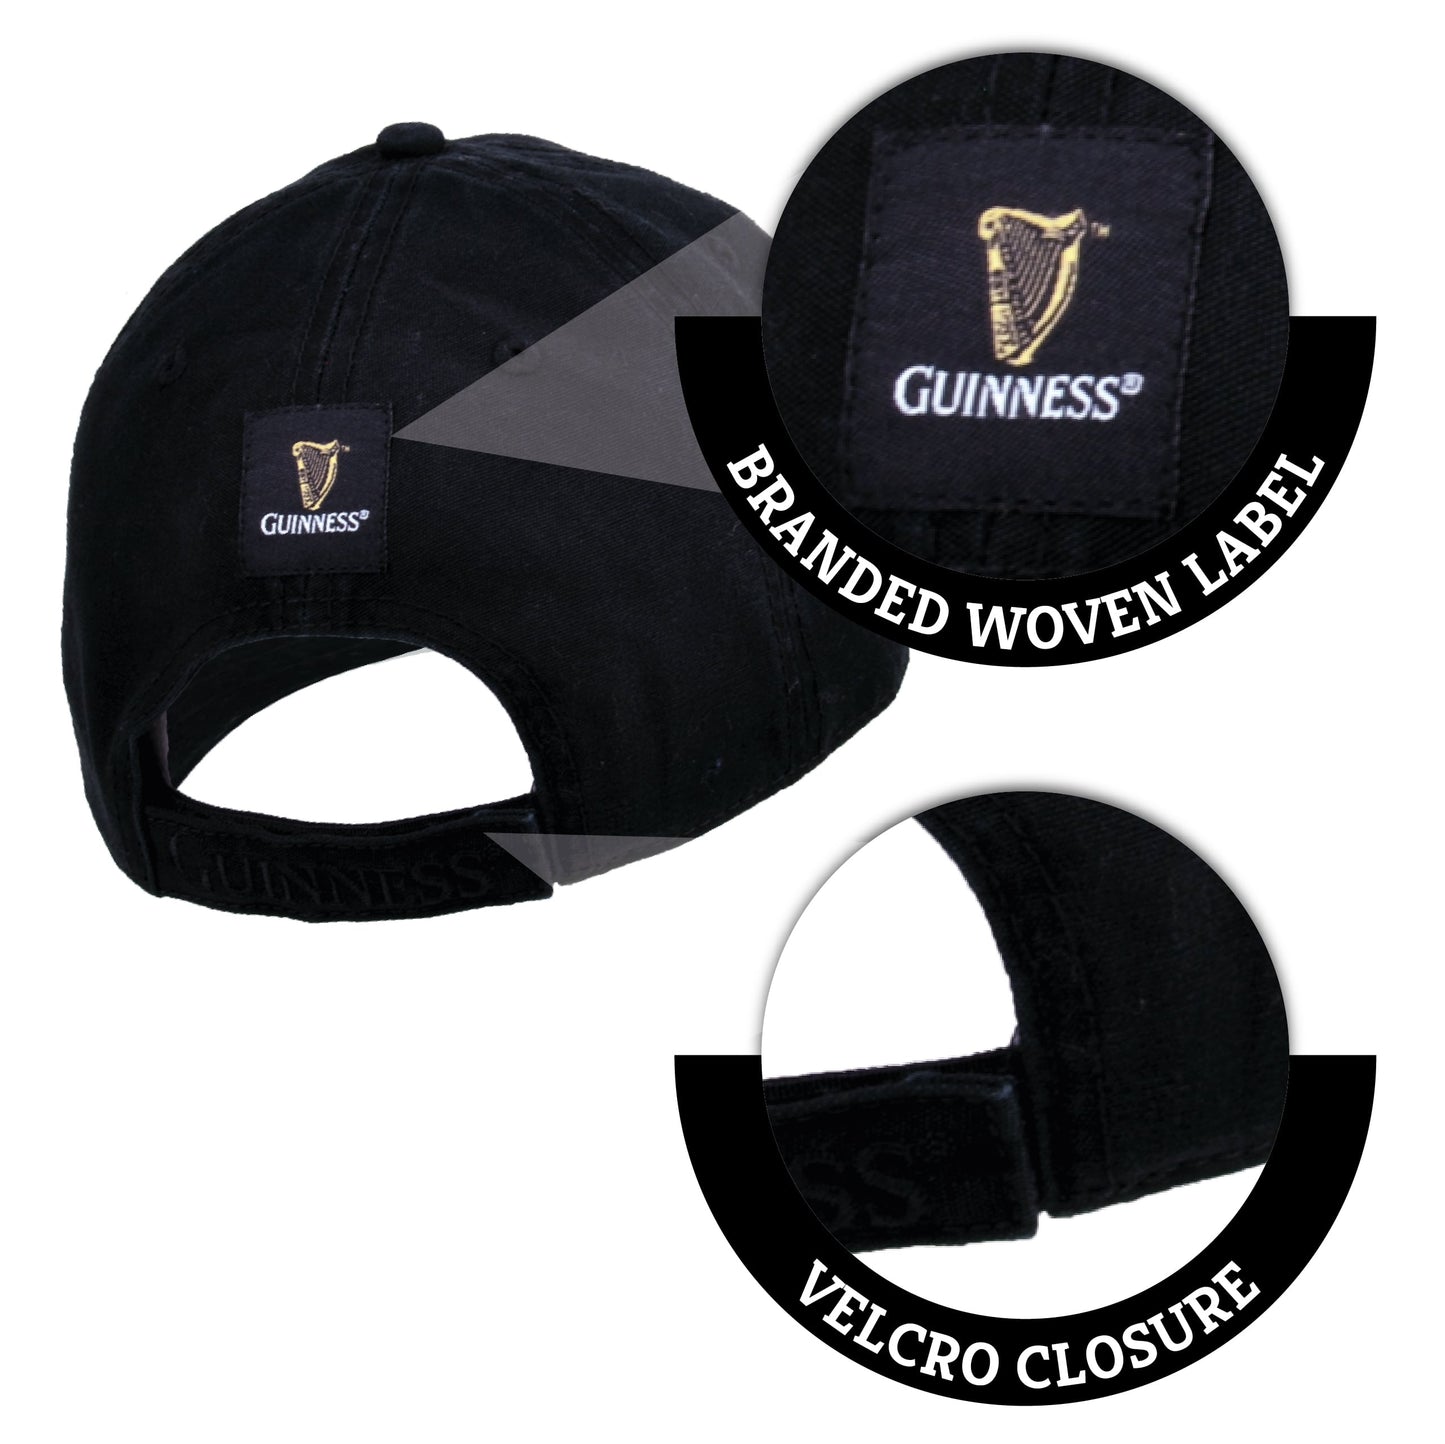 Guinness UK branded Guinness Premium Black & Camel with Leather Patch baseball cap.